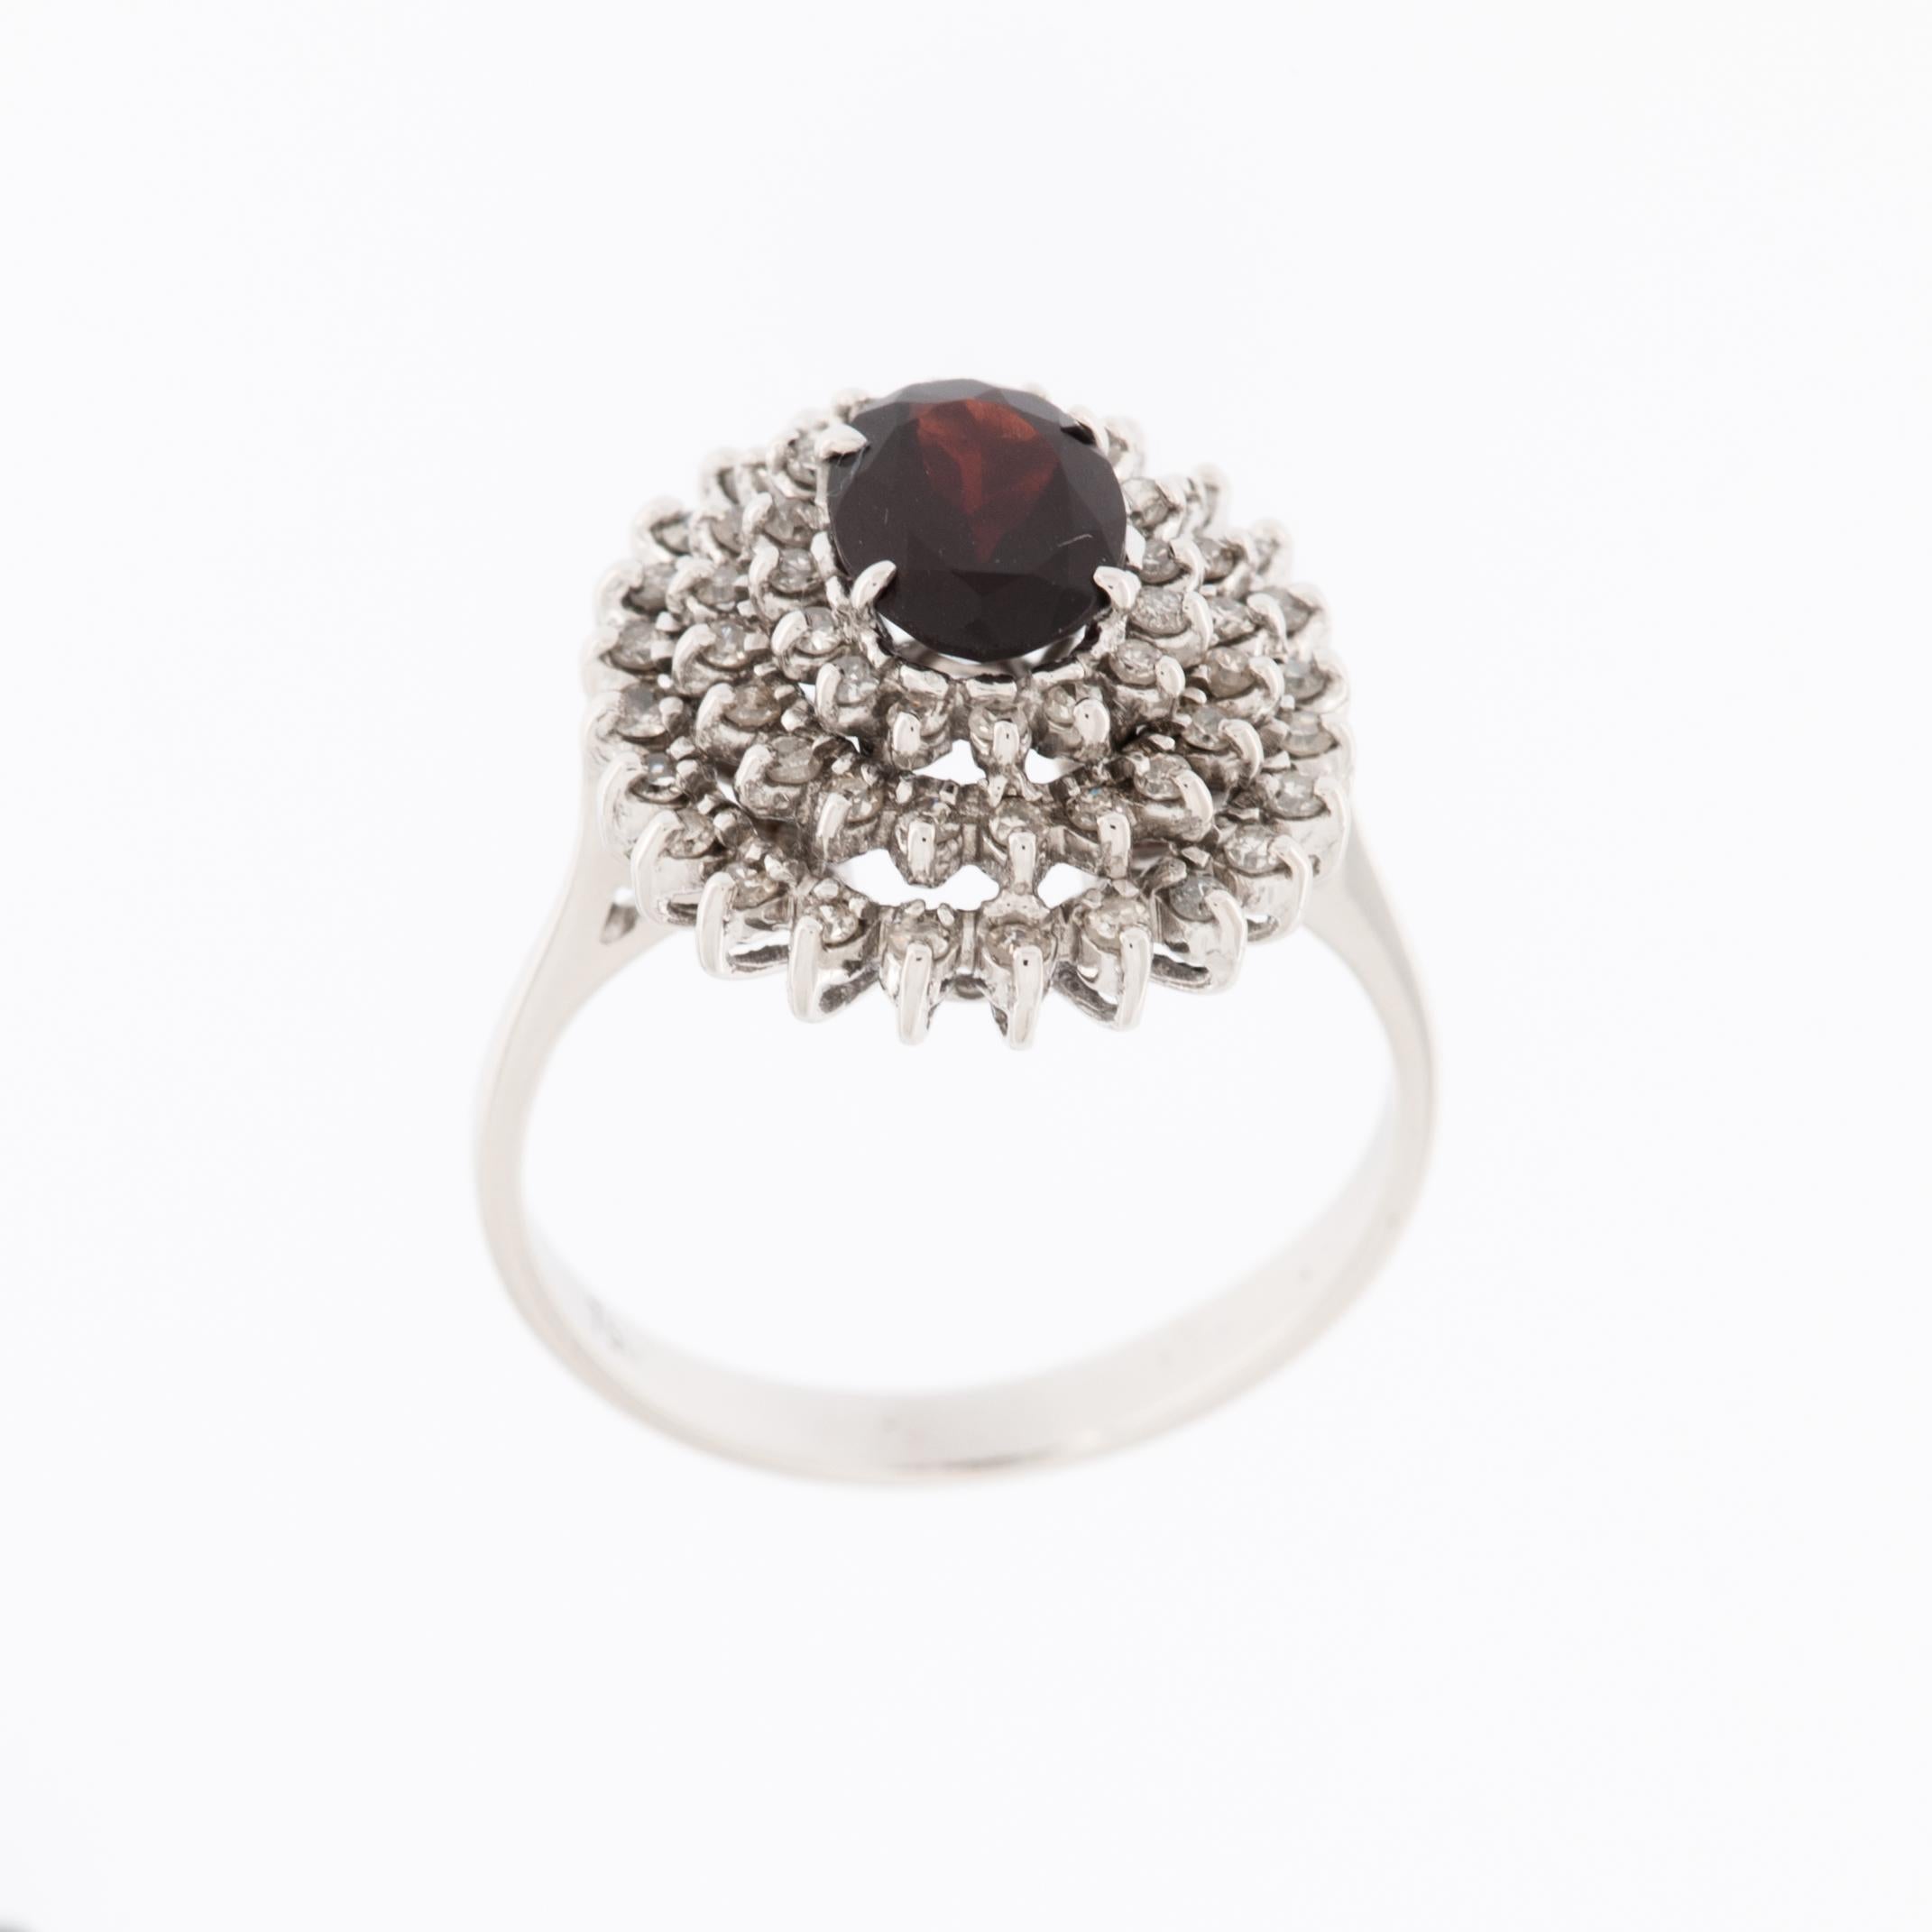 The Italian 18kt White Gold Cocktail Ring with Diamonds and Garnet entourage setting is a stunning and luxurious piece of jewelry. 

This ring is crafted from 18-karat white gold, which is known for its lustrous and durable properties. White gold